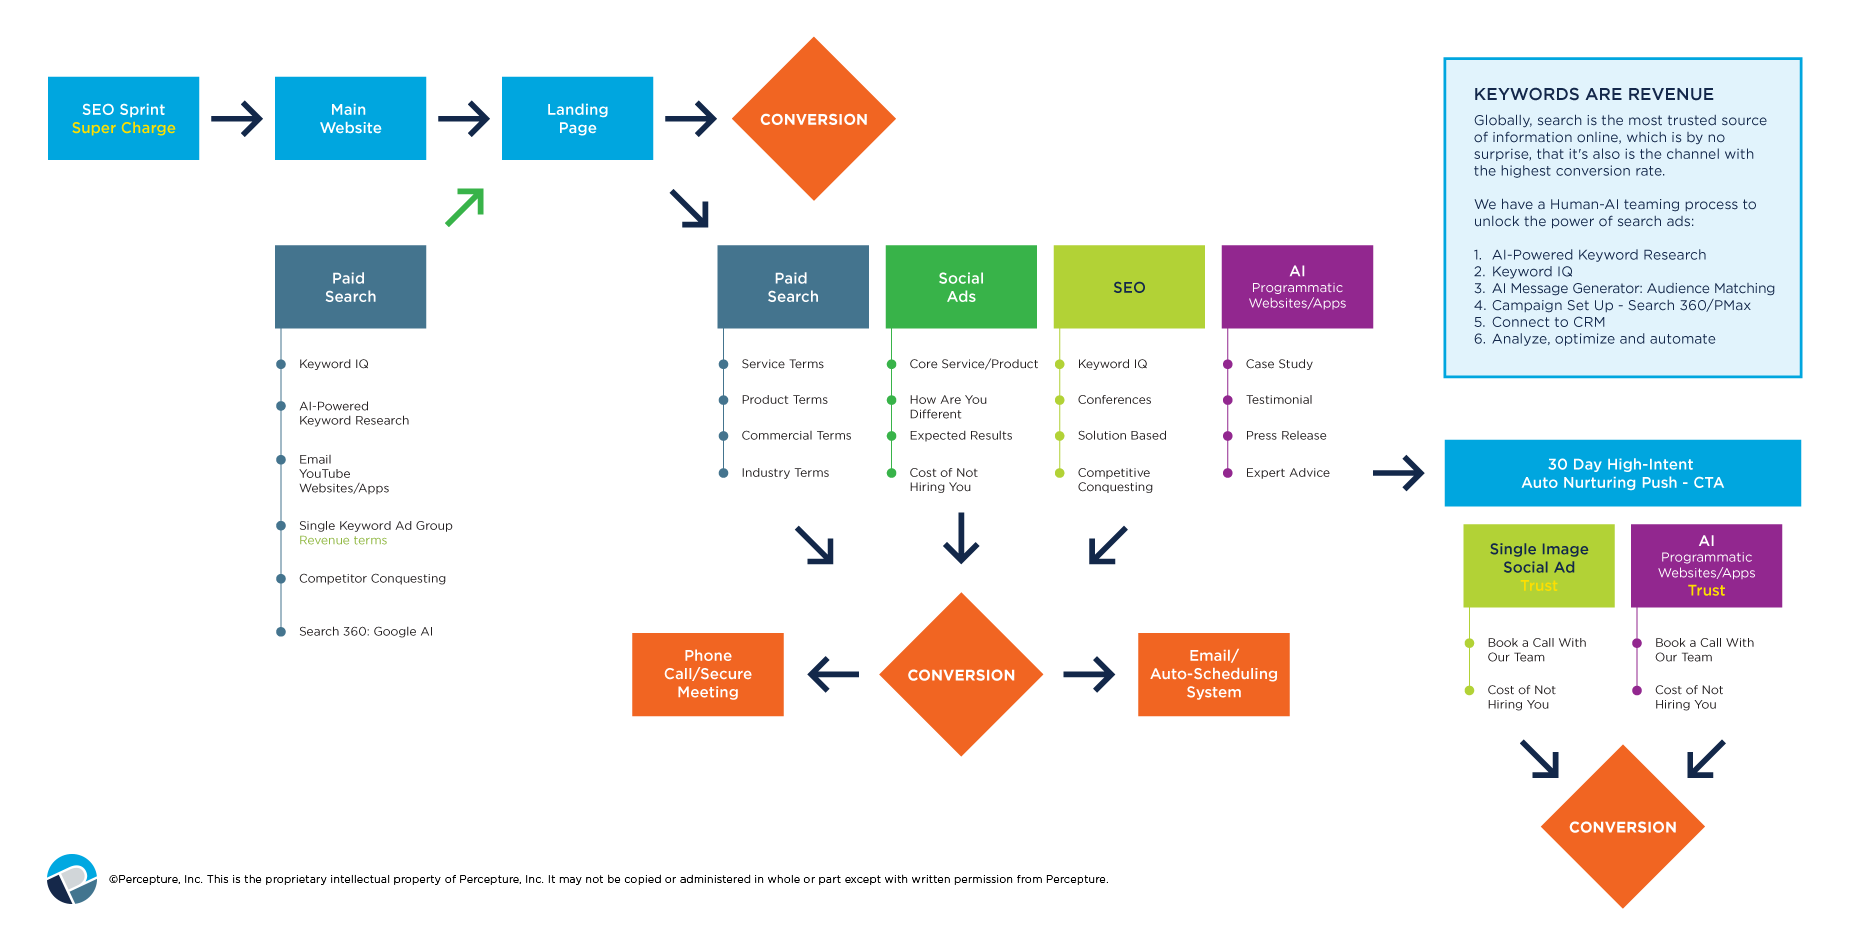 a mapped strategy in flow chart format and process sample of Percepture's paid search services.